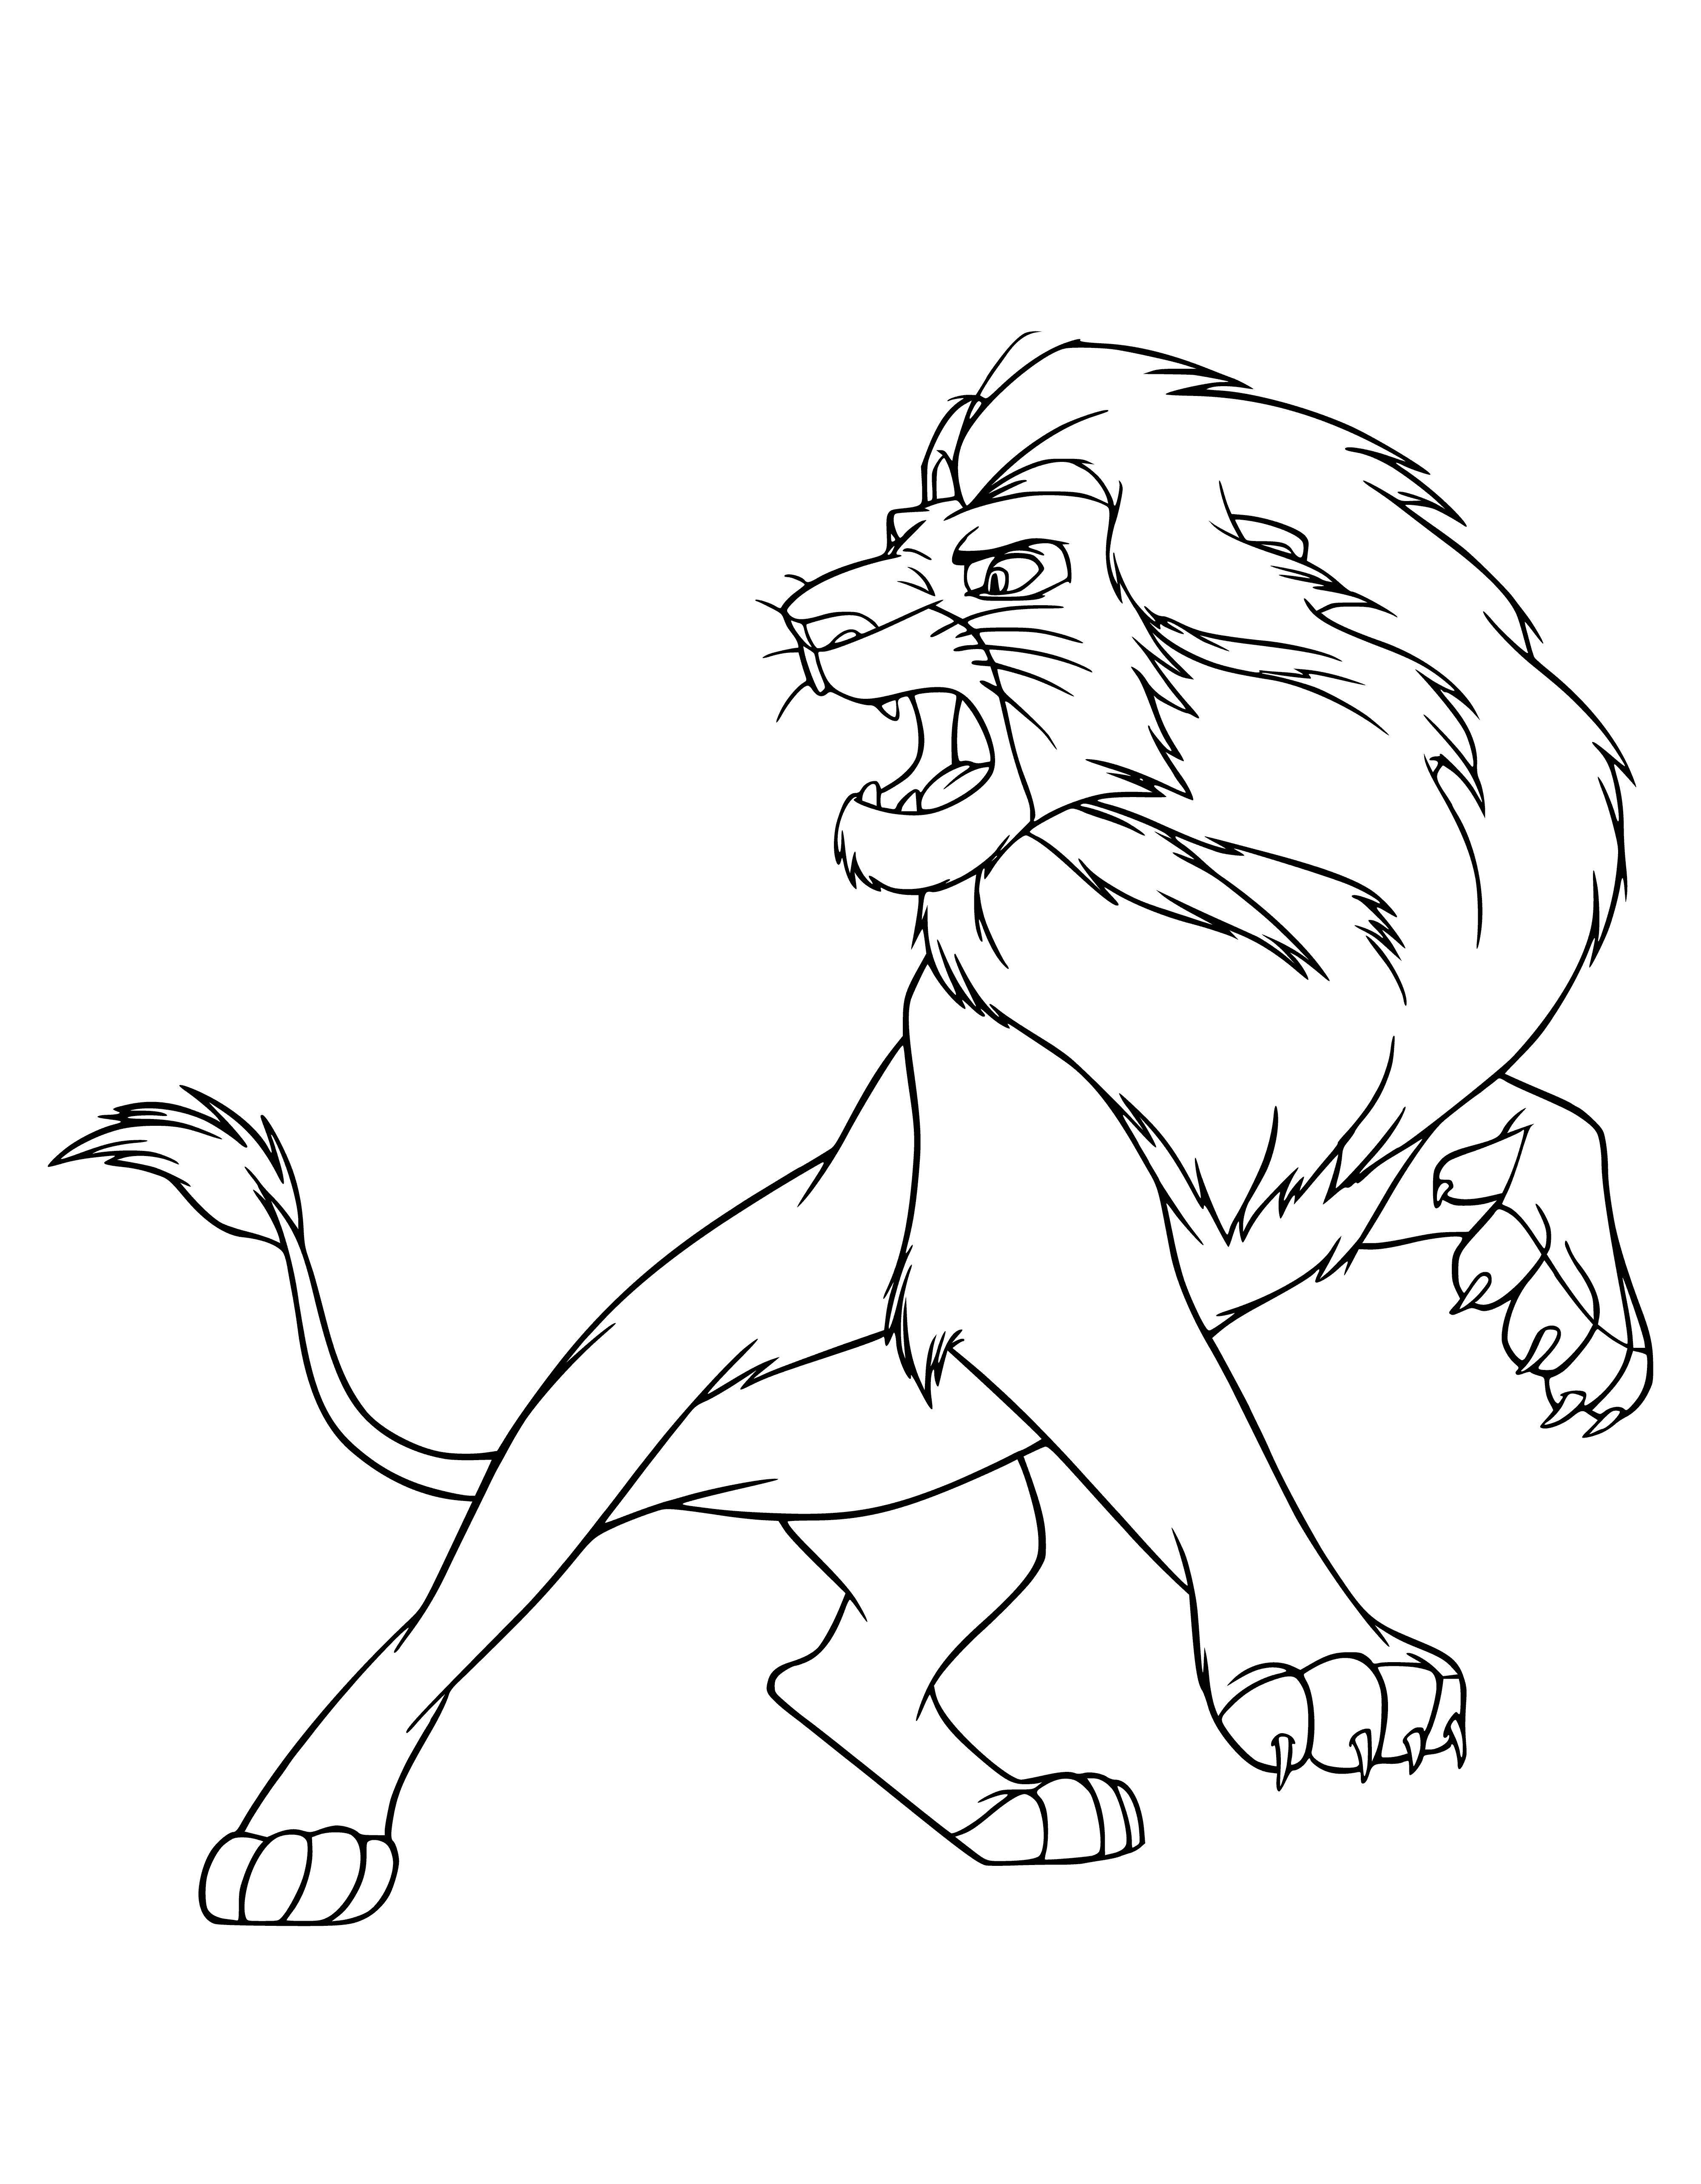 coloring page: A large, golden lion roars on a rocky ledge, with a green forest behind it. #KingOfTheJungle